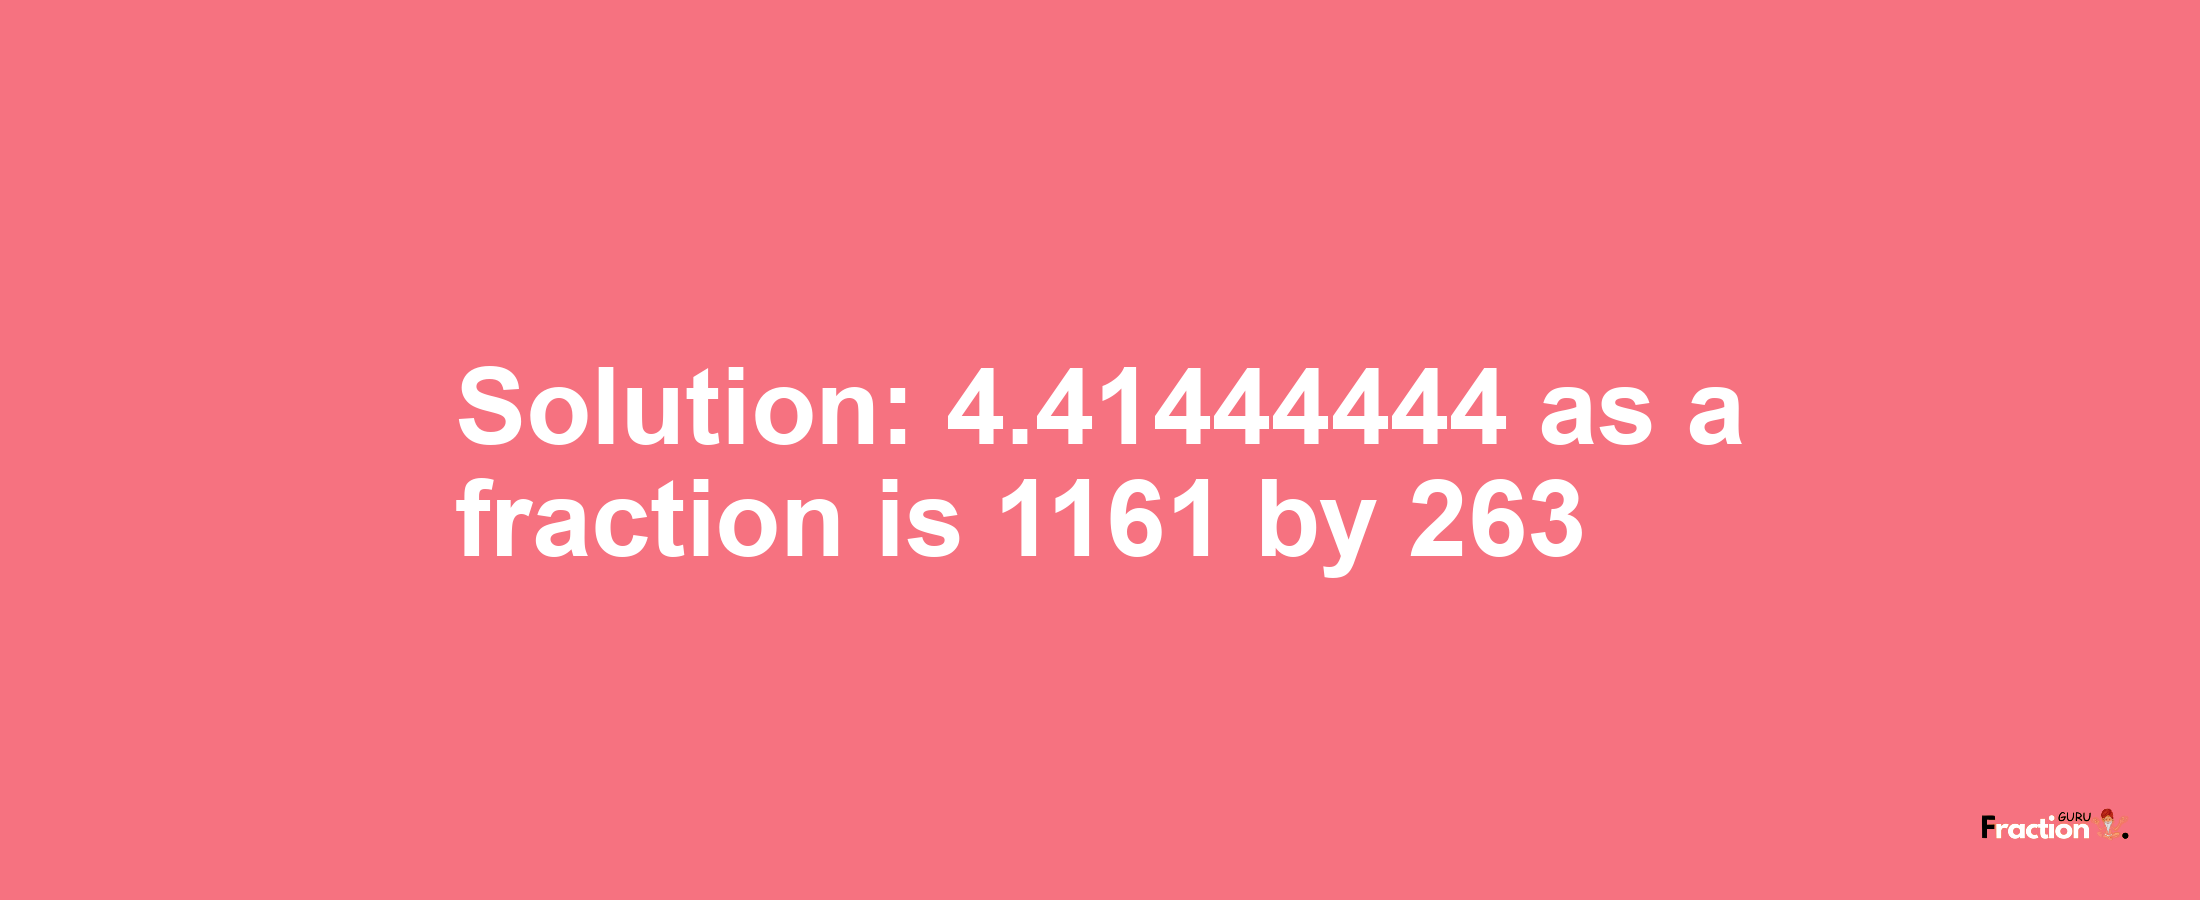 Solution:4.41444444 as a fraction is 1161/263